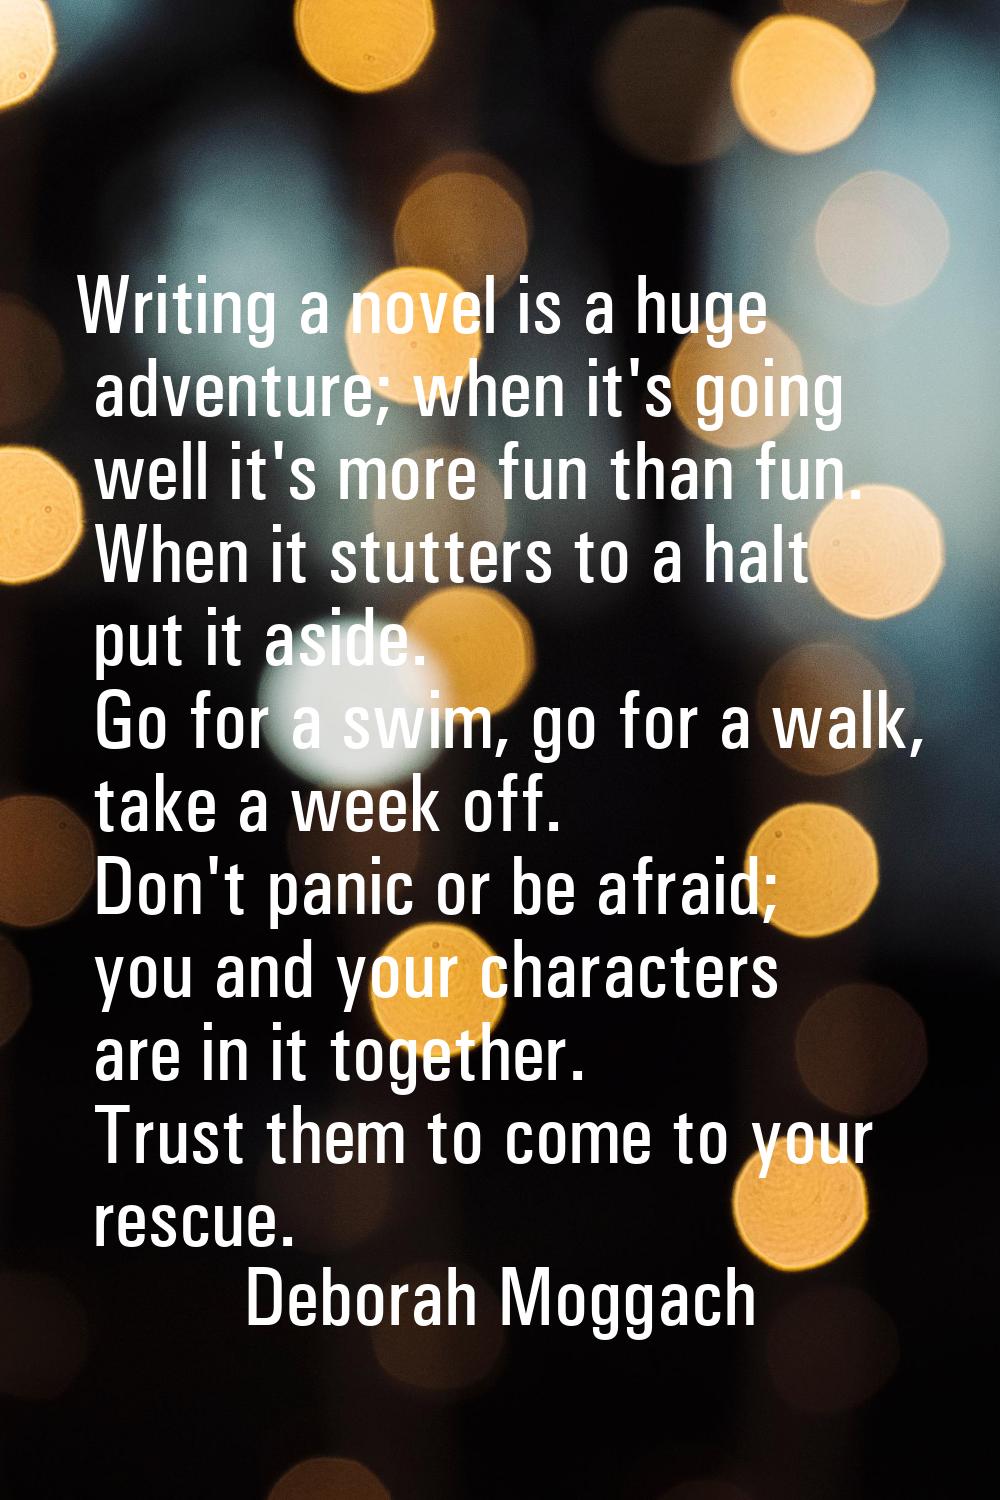 Writing a novel is a huge adventure; when it's going well it's more fun than fun. When it stutters 